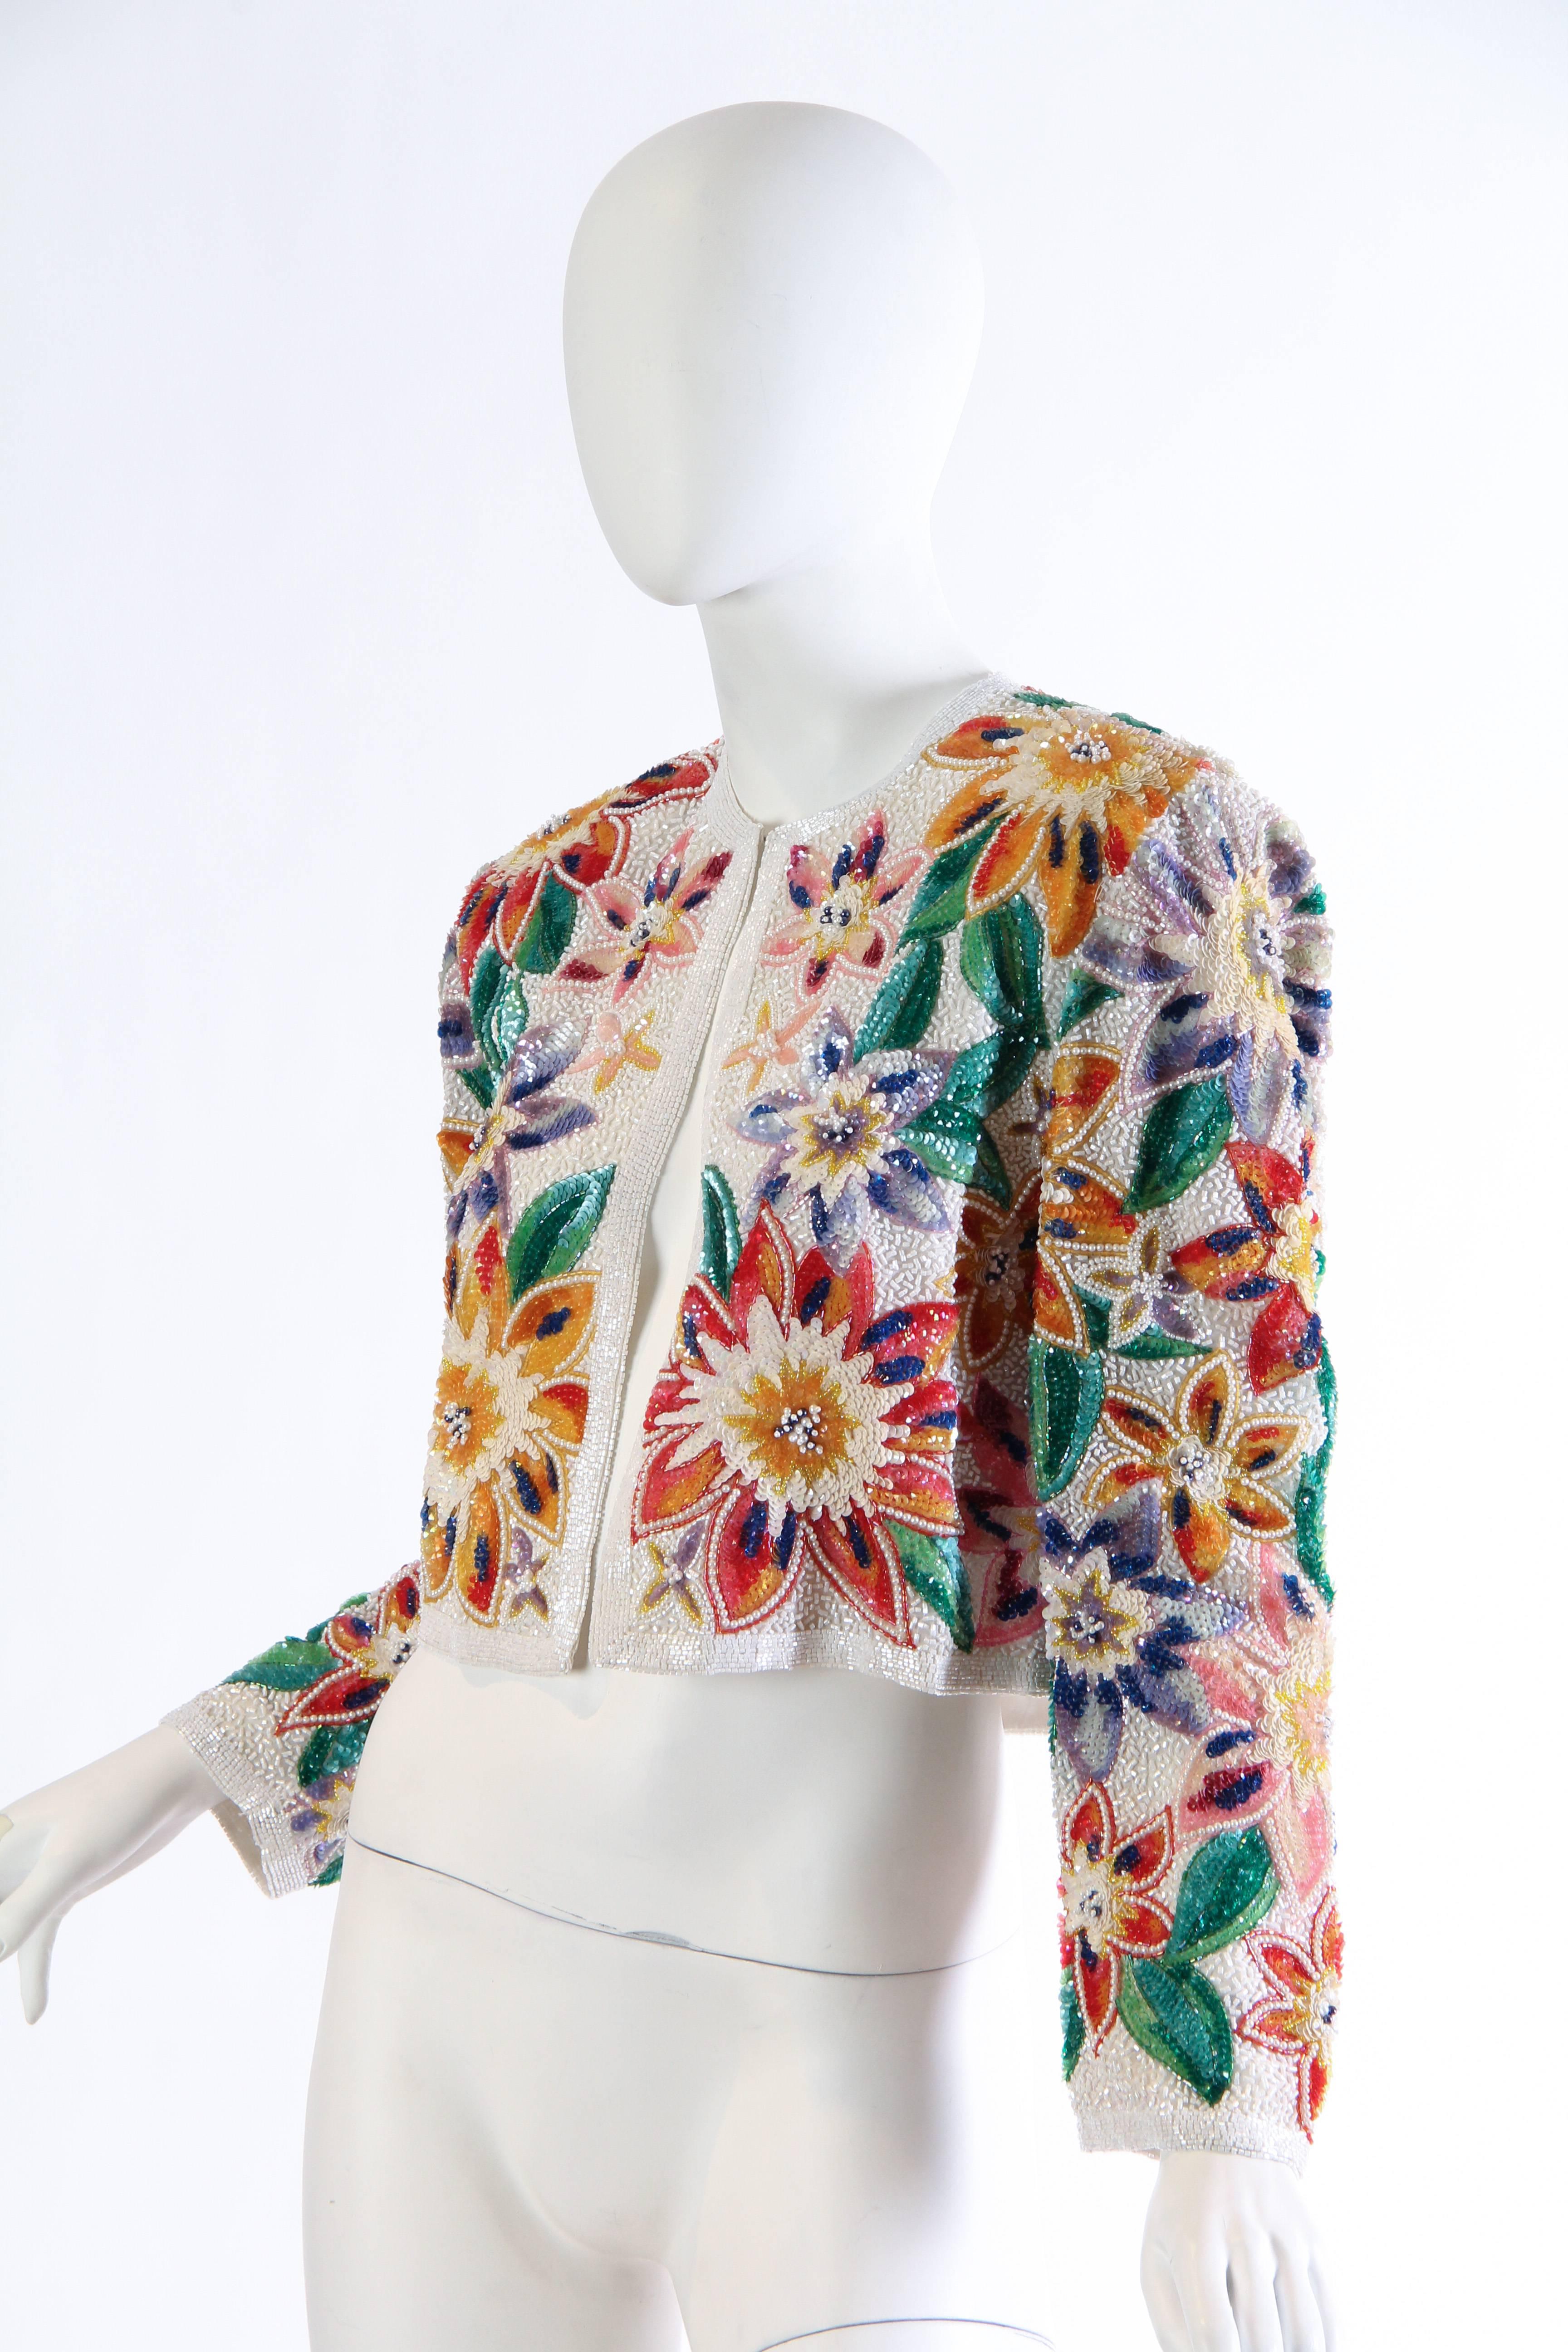 Fantastic tropical flowers bloom right out of the fabric of this luxe evening jacket from Naeem Khan. An array of shades of colors and beads creates this illusion and it is magical. The perfect little cover up for a beach bride or for a night out in